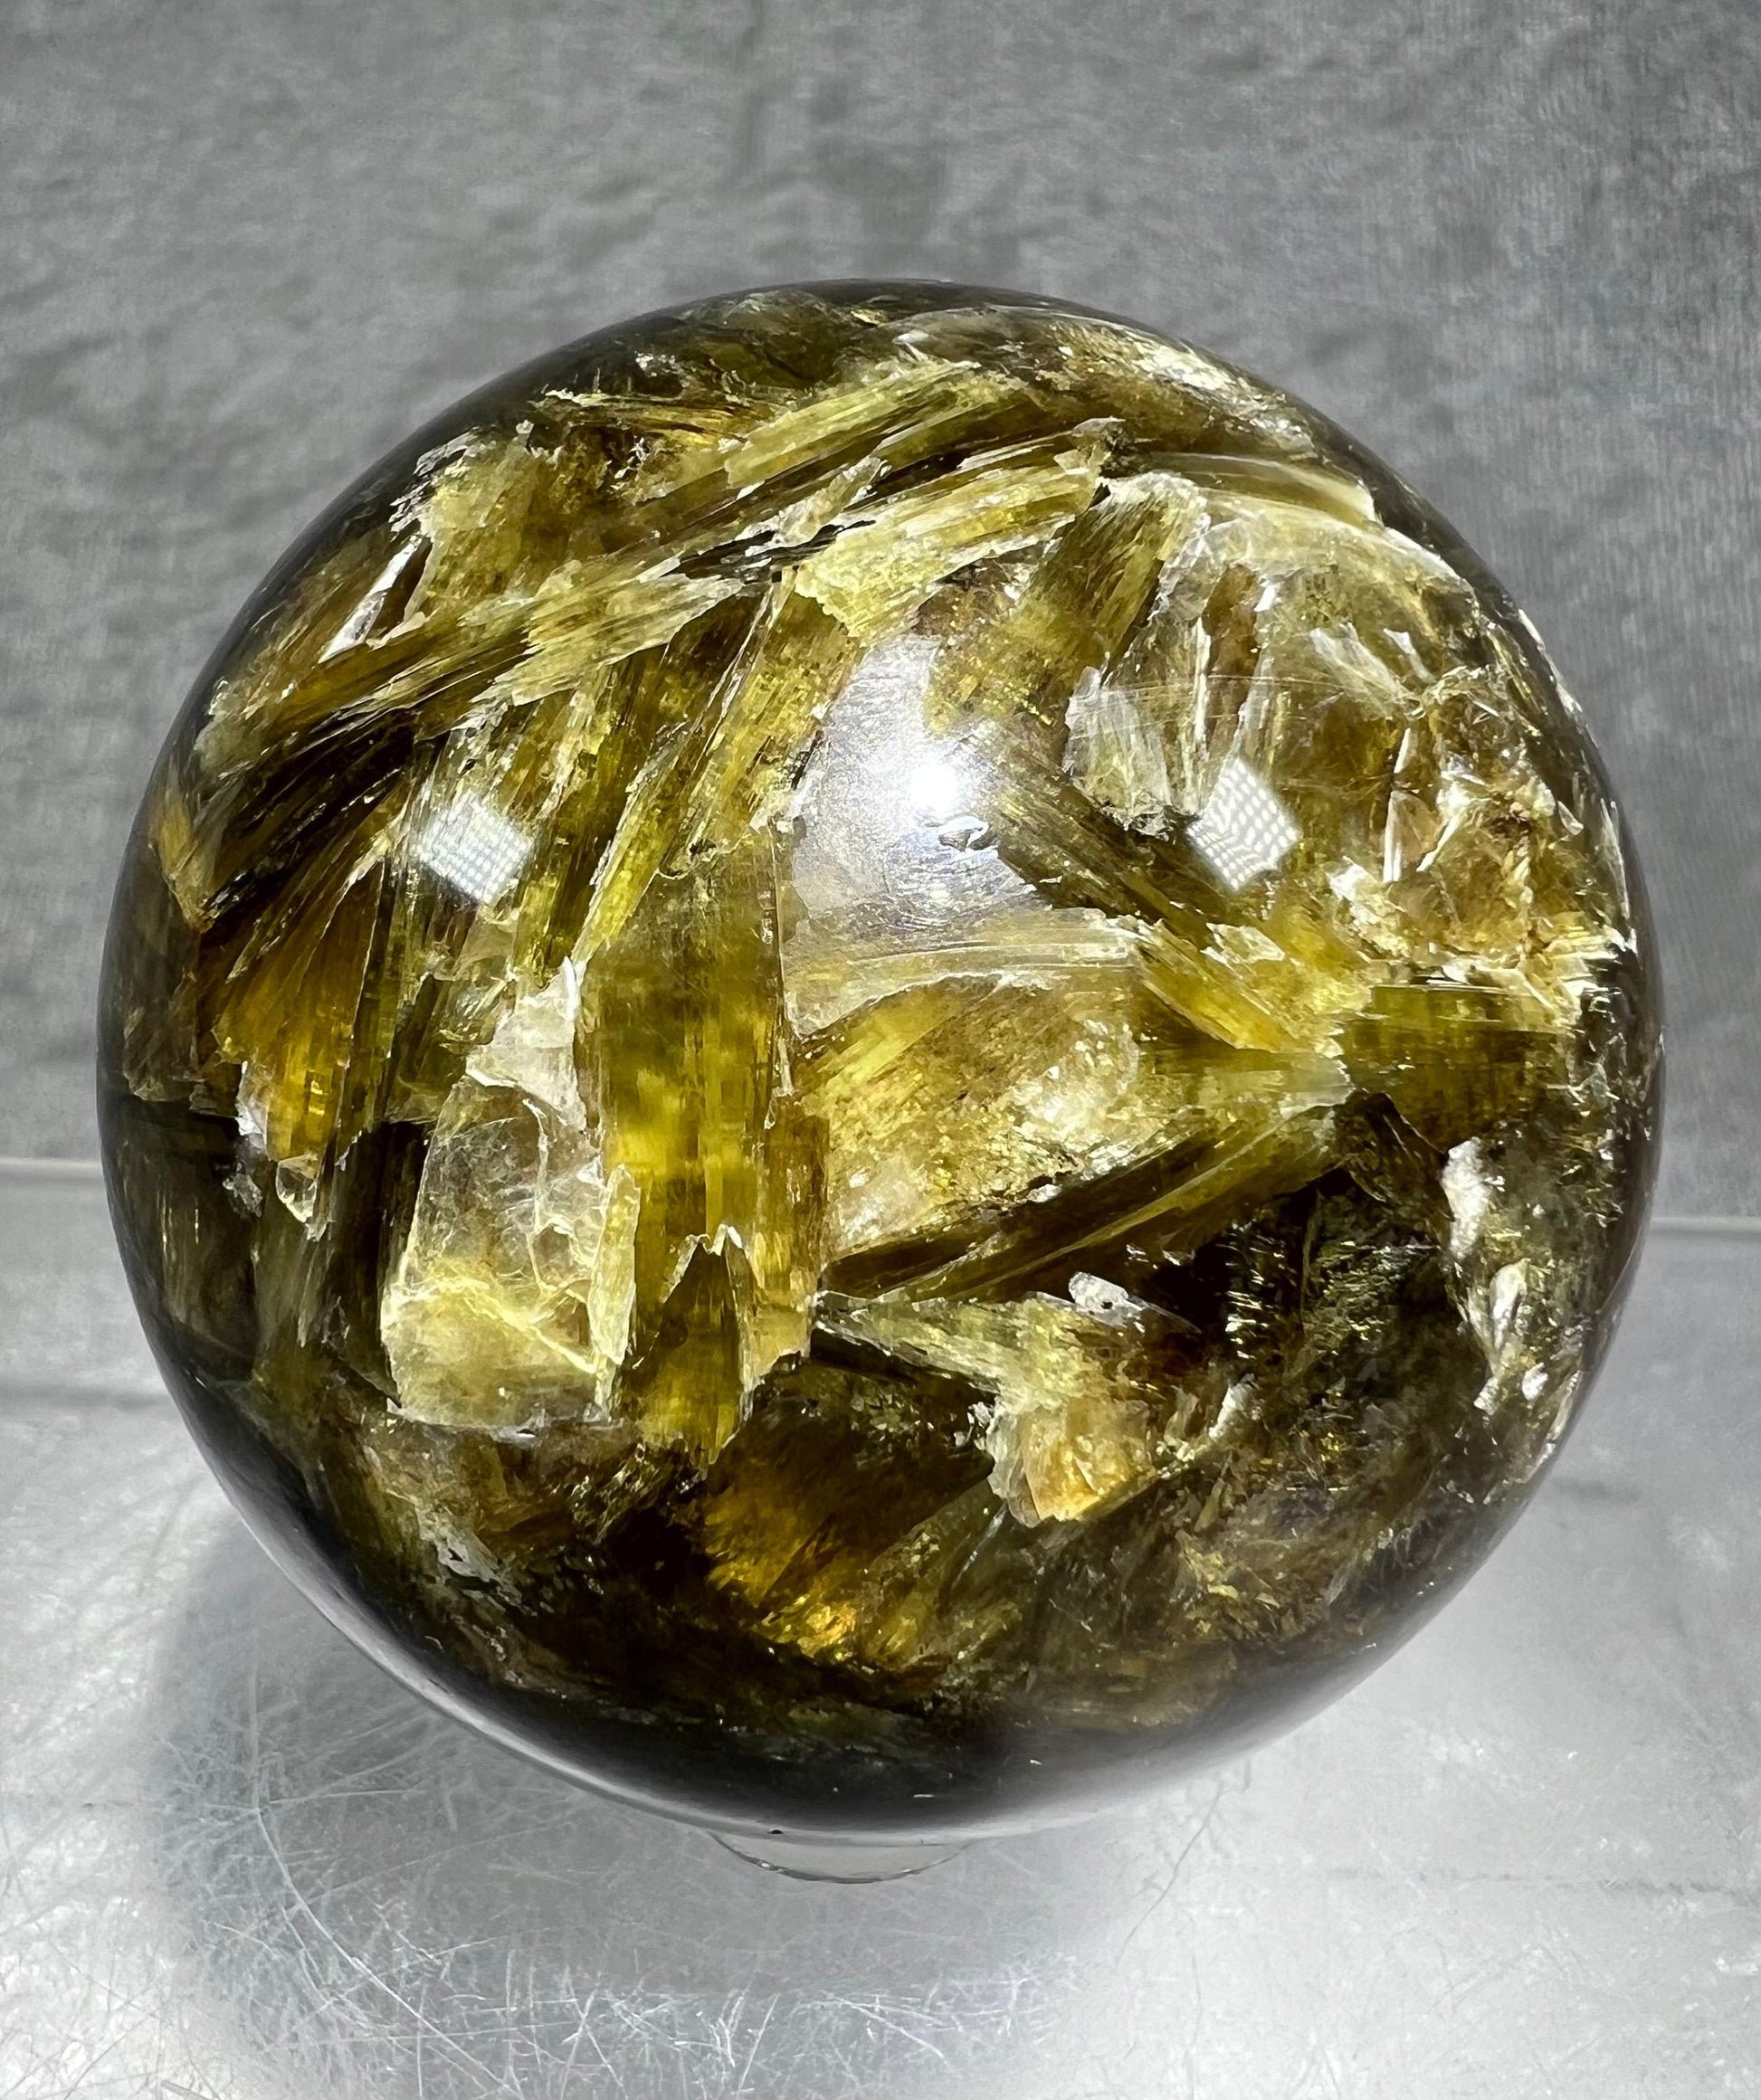 Amazing Gold Mica Sphere. 60mm. Gorgeous High Quality With Tons Of Flash. Beautiful Display Crystal.